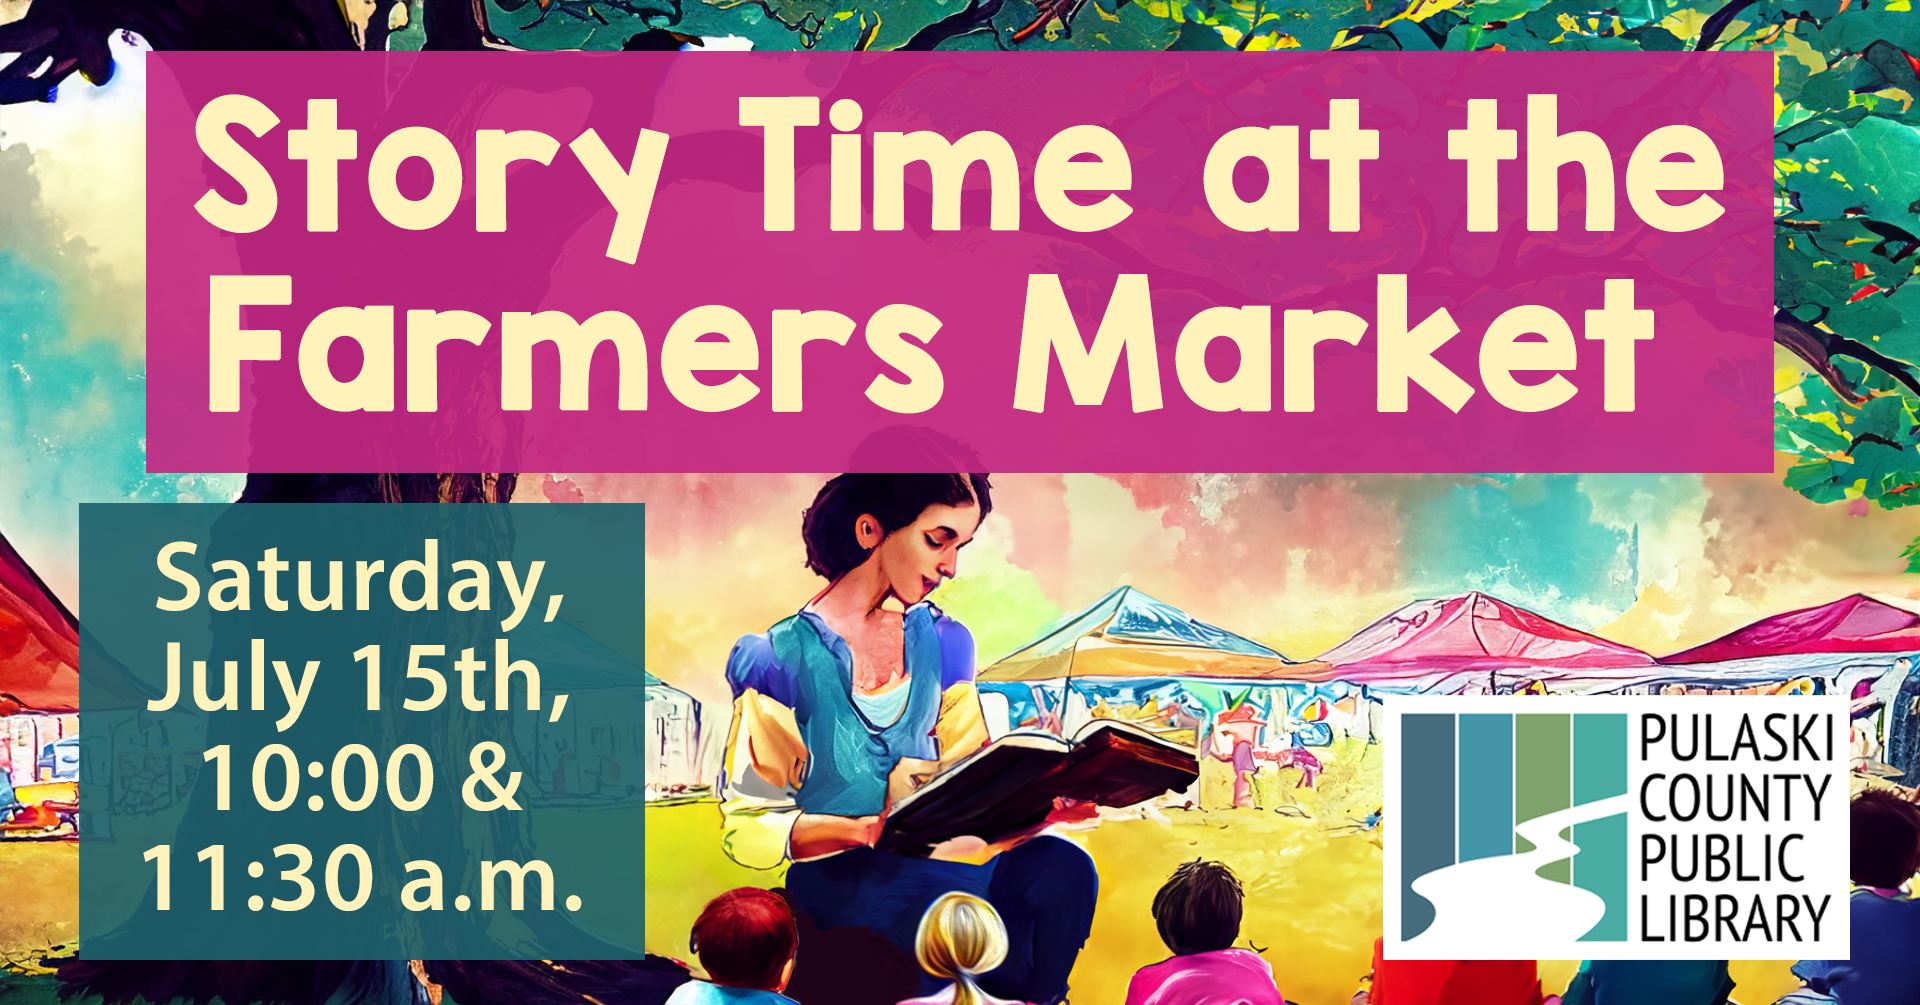 Story Time at the Farmers Market